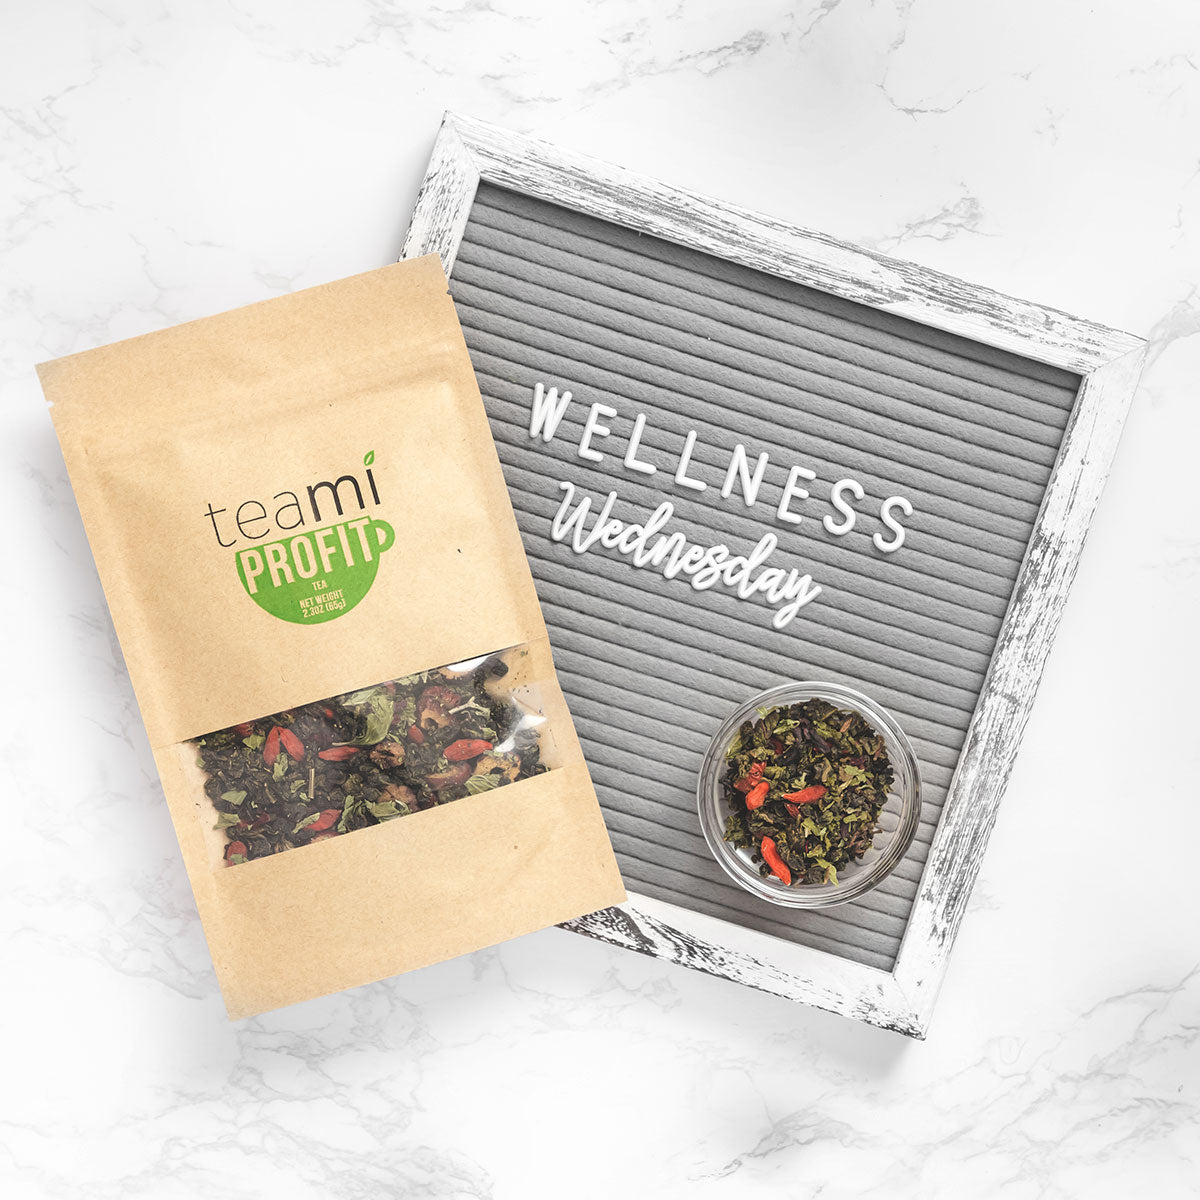 teami profit tea on kitchen counter with wellness wednesday sign